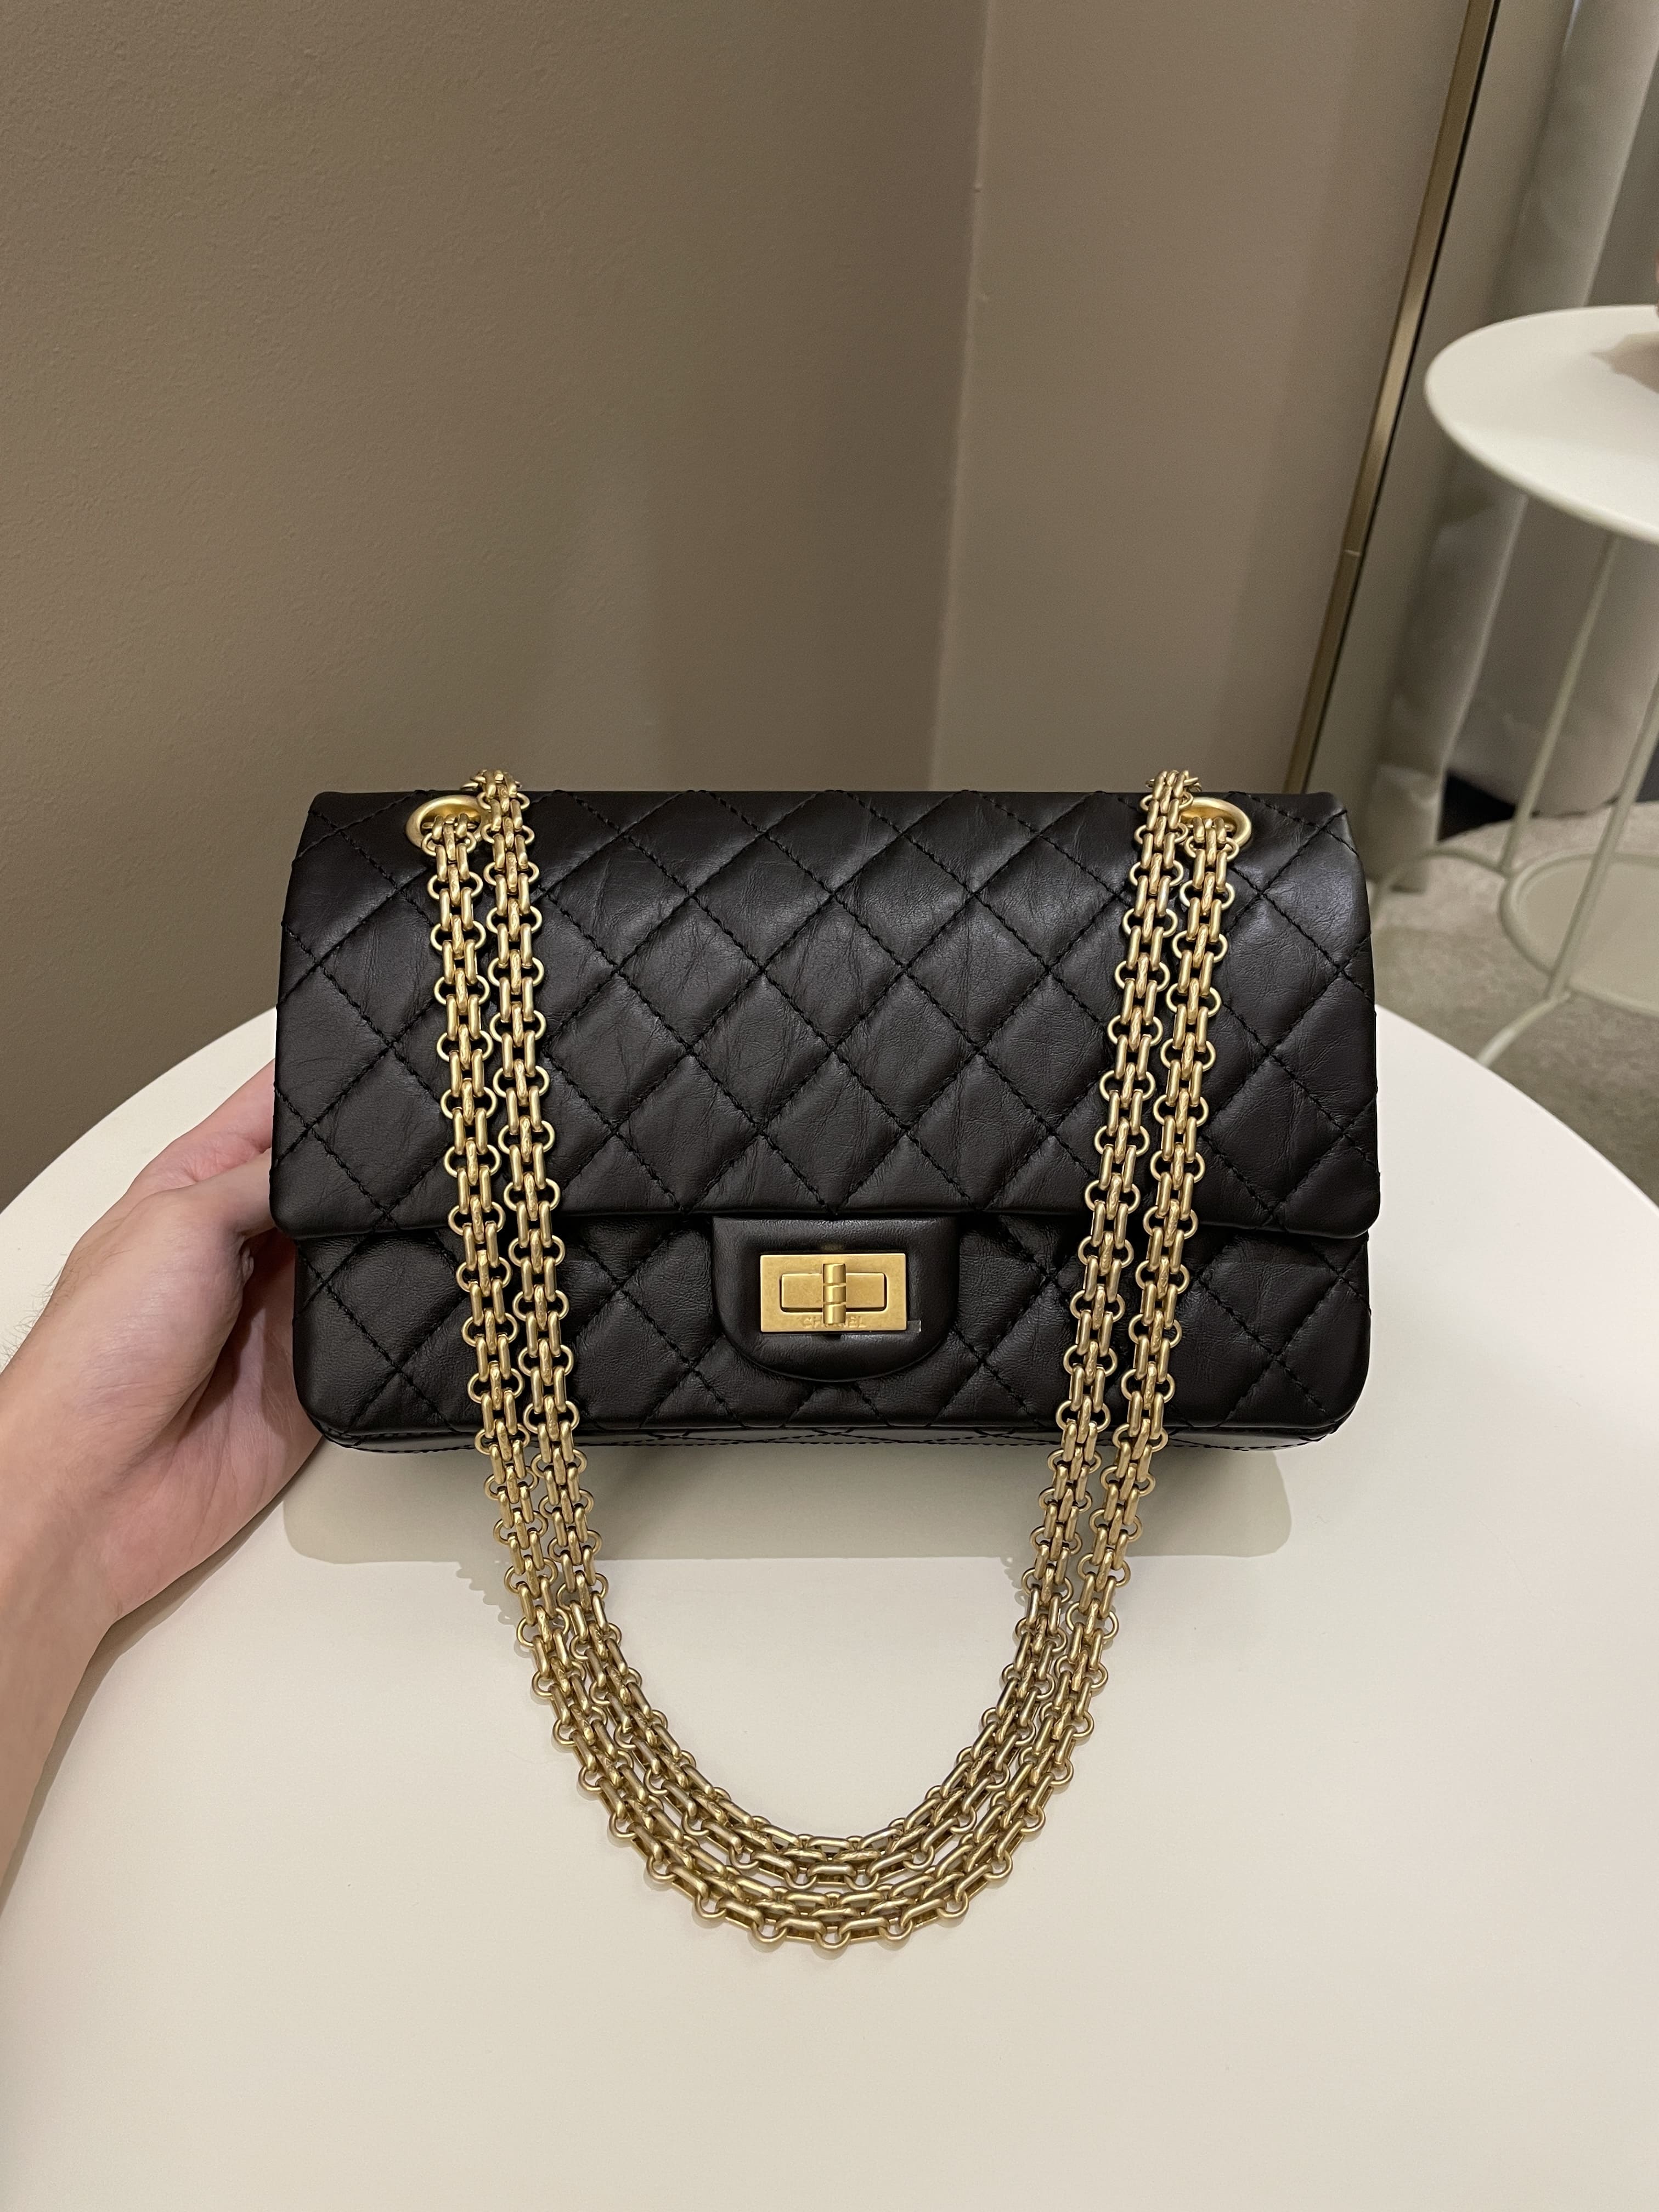 Chanel 2.55 225 Quilted Reissue Double Flap Black Aged Calfskin